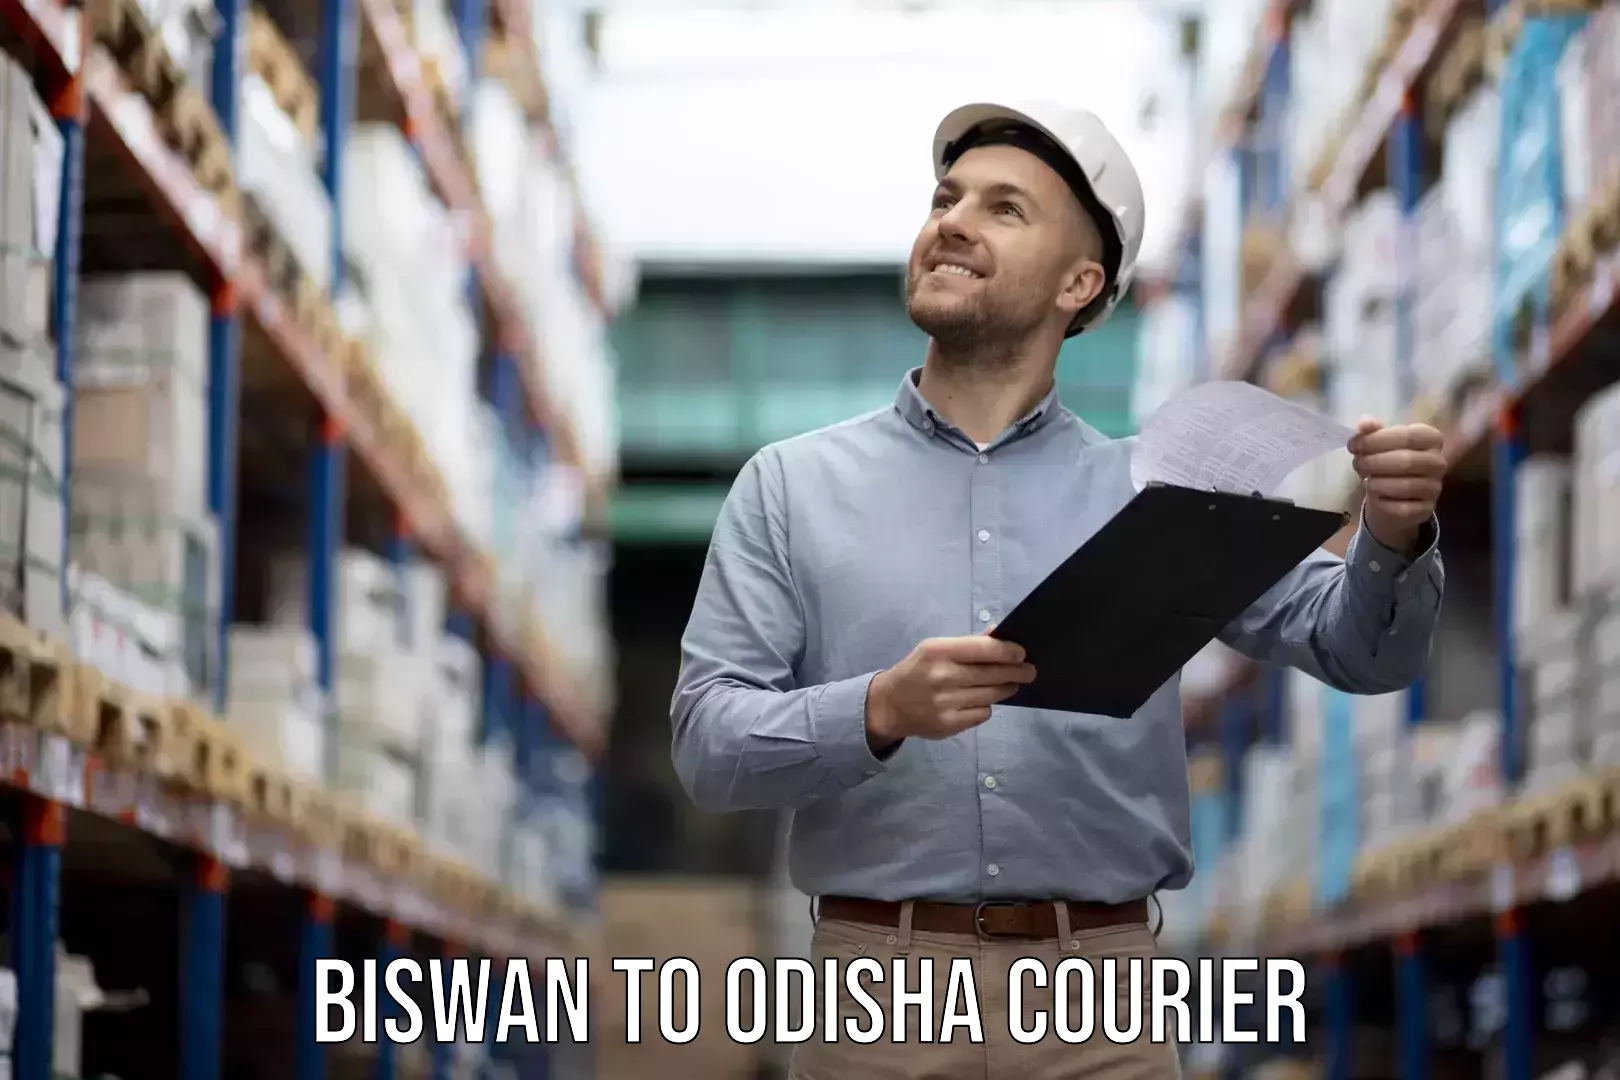 Professional furniture movers in Biswan to Dandisahi